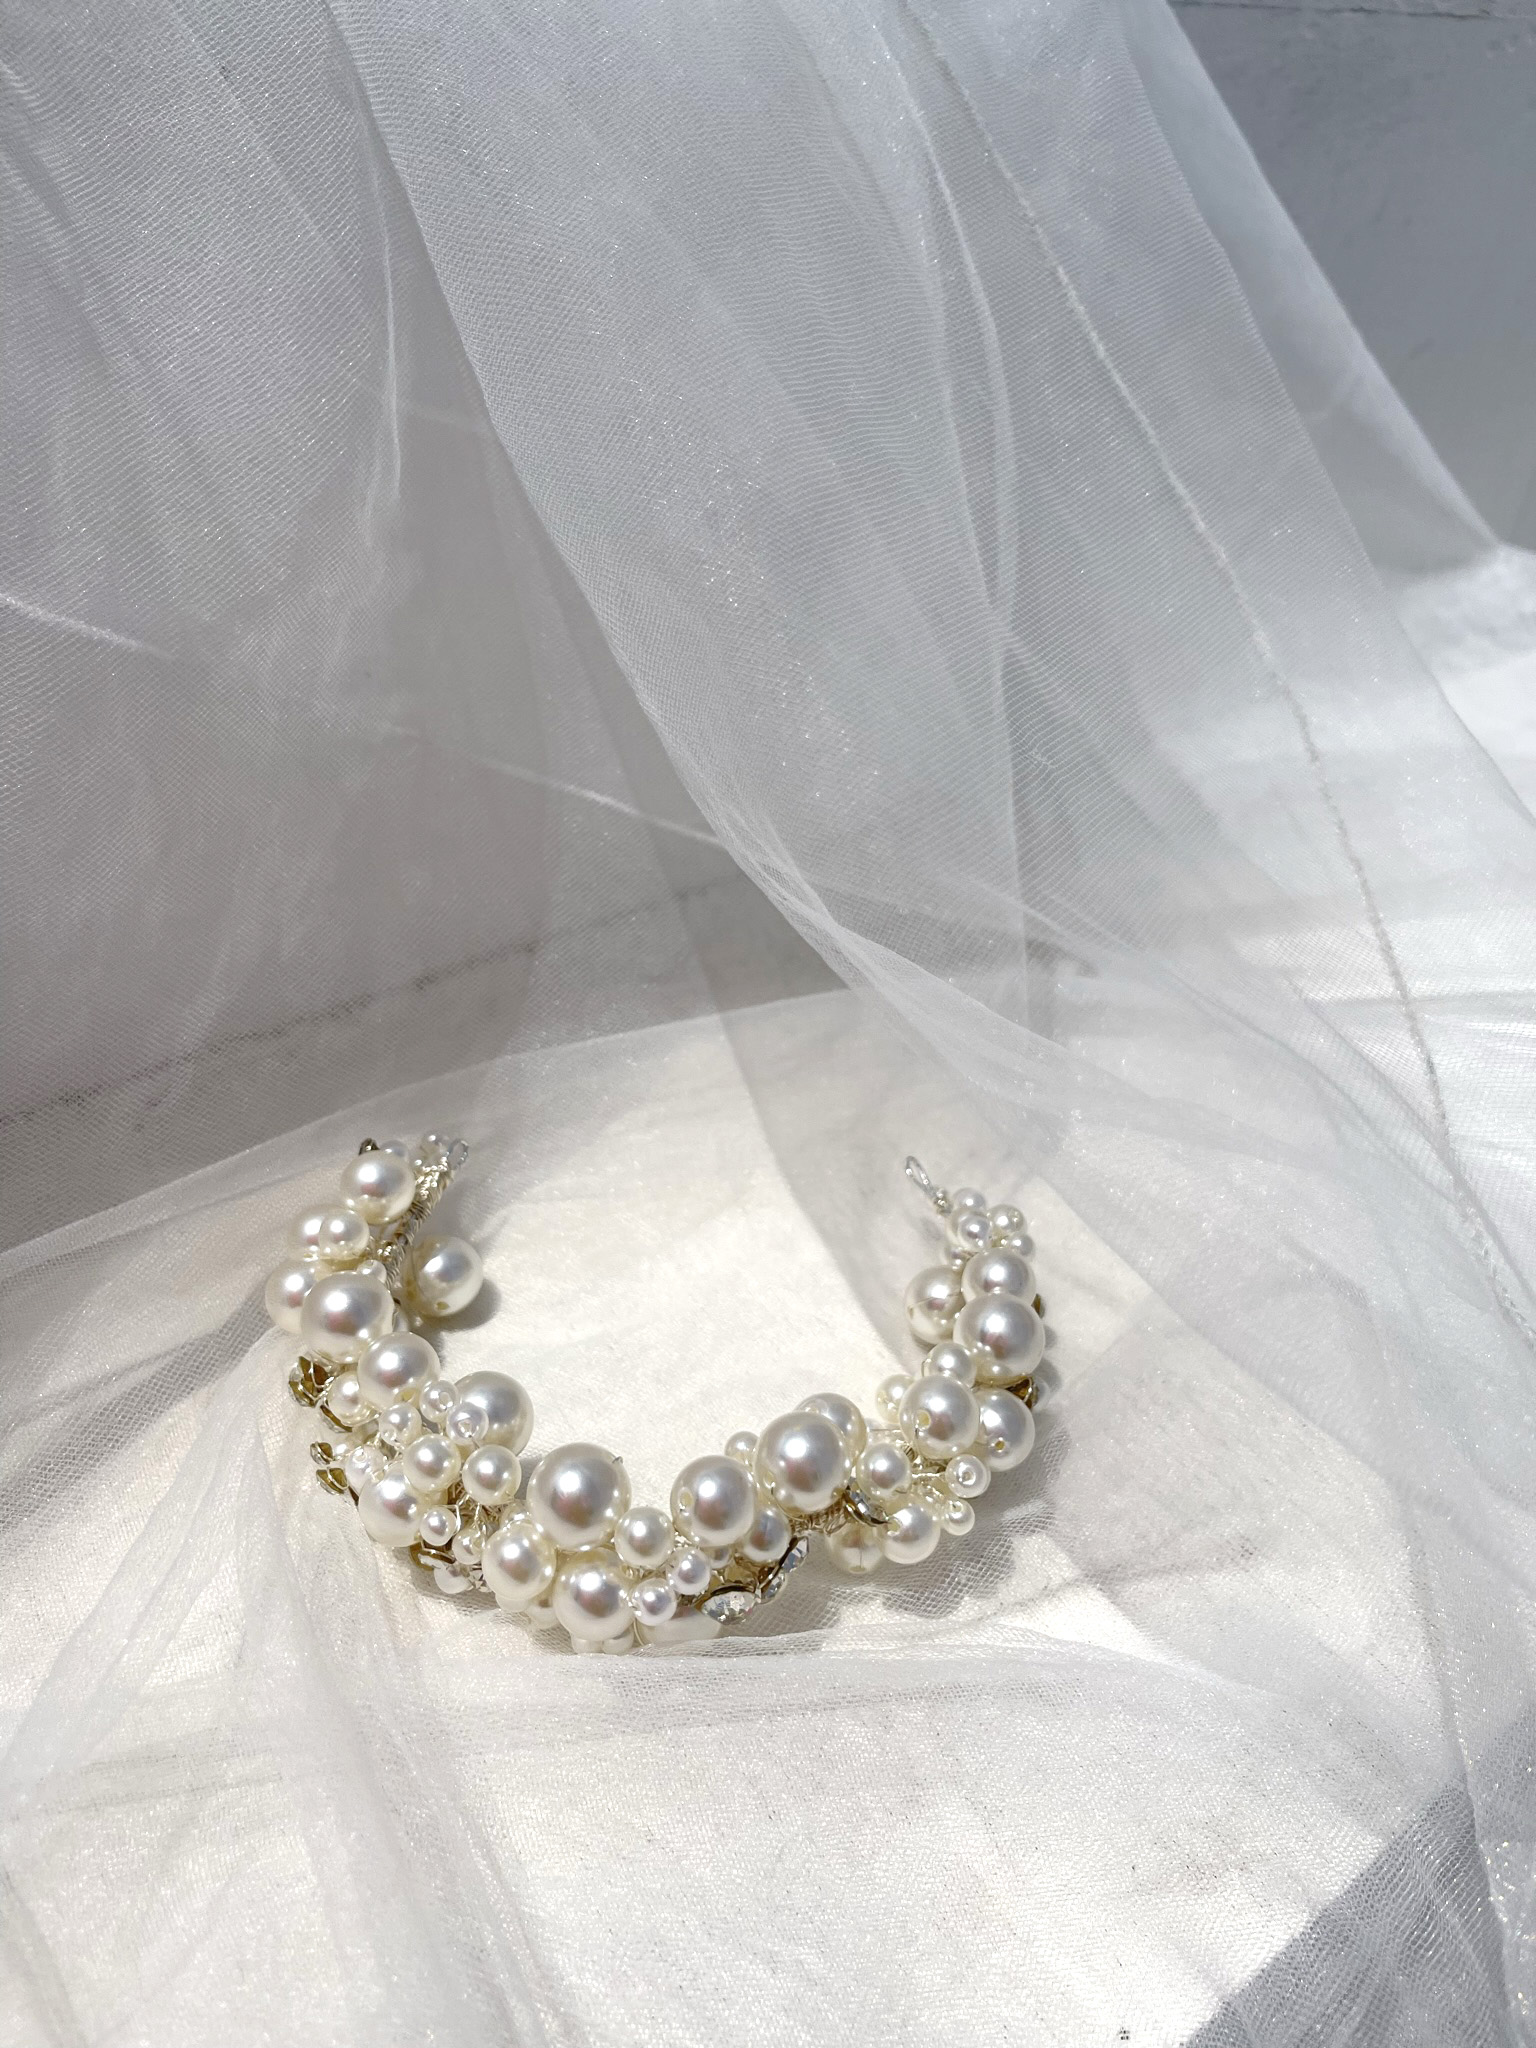 Pearl bridal hairpiece